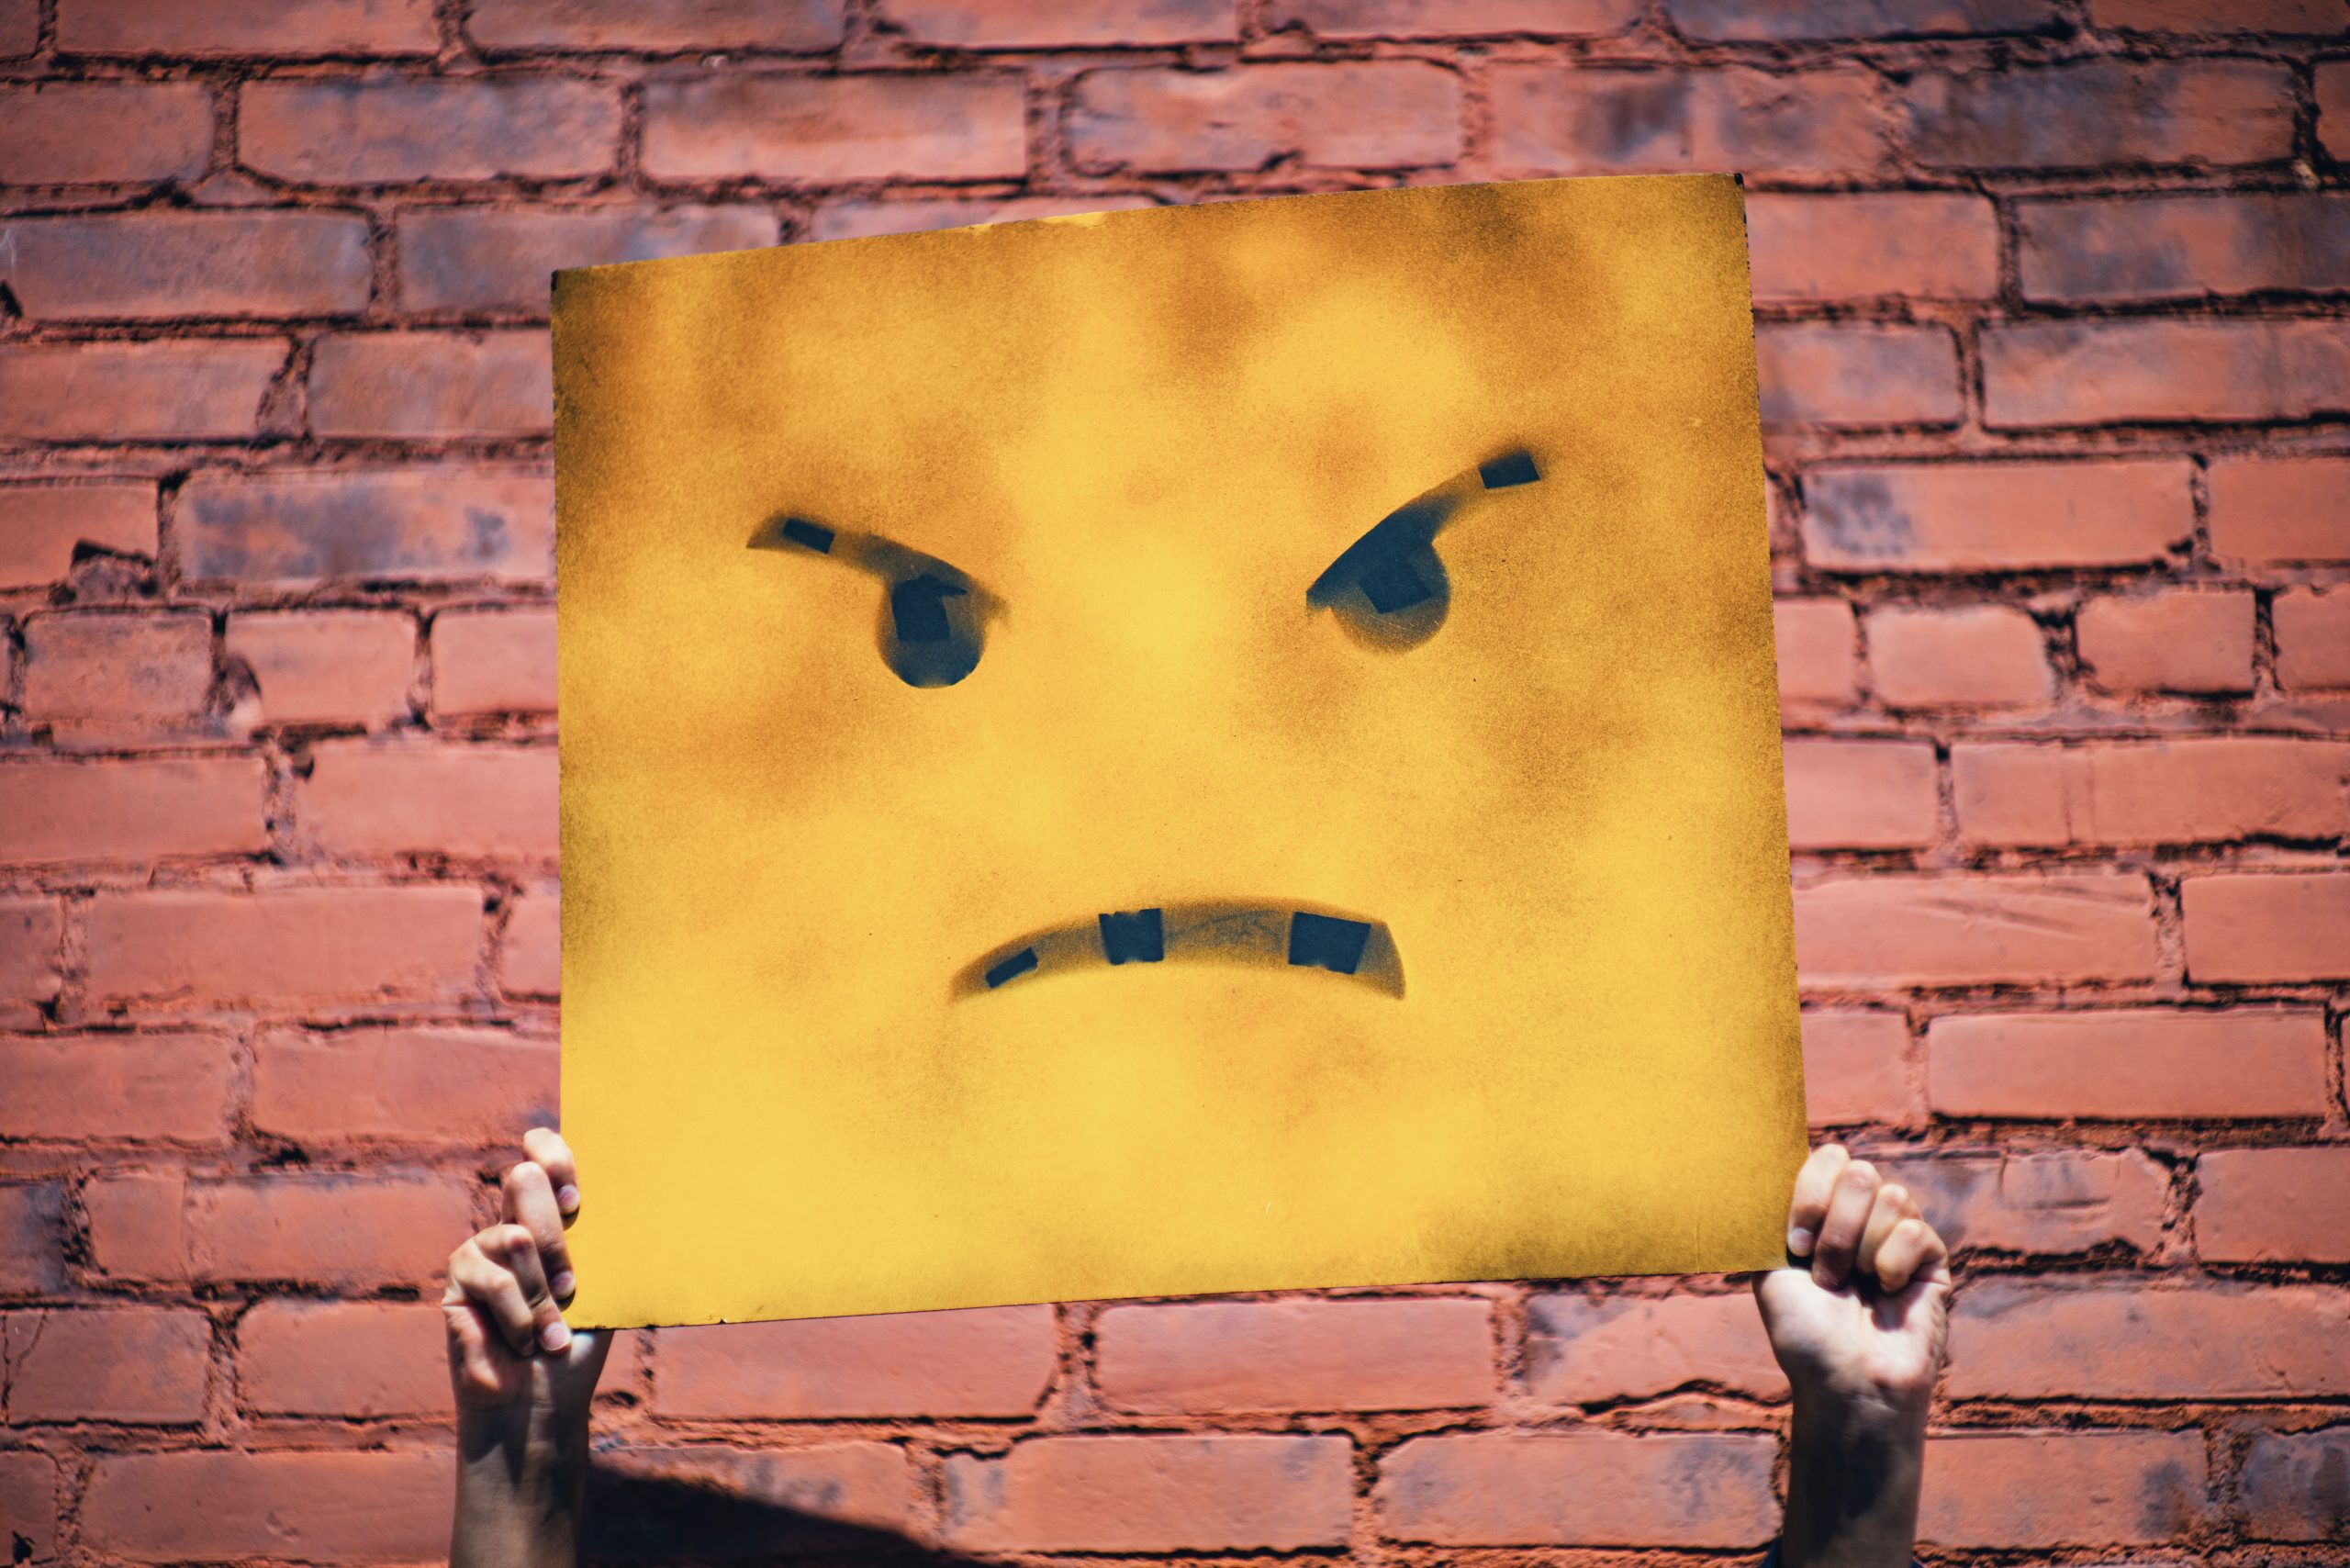 Dirty Yellow Box with a scowling face drawn on being held up in front of a persons face with a brick background